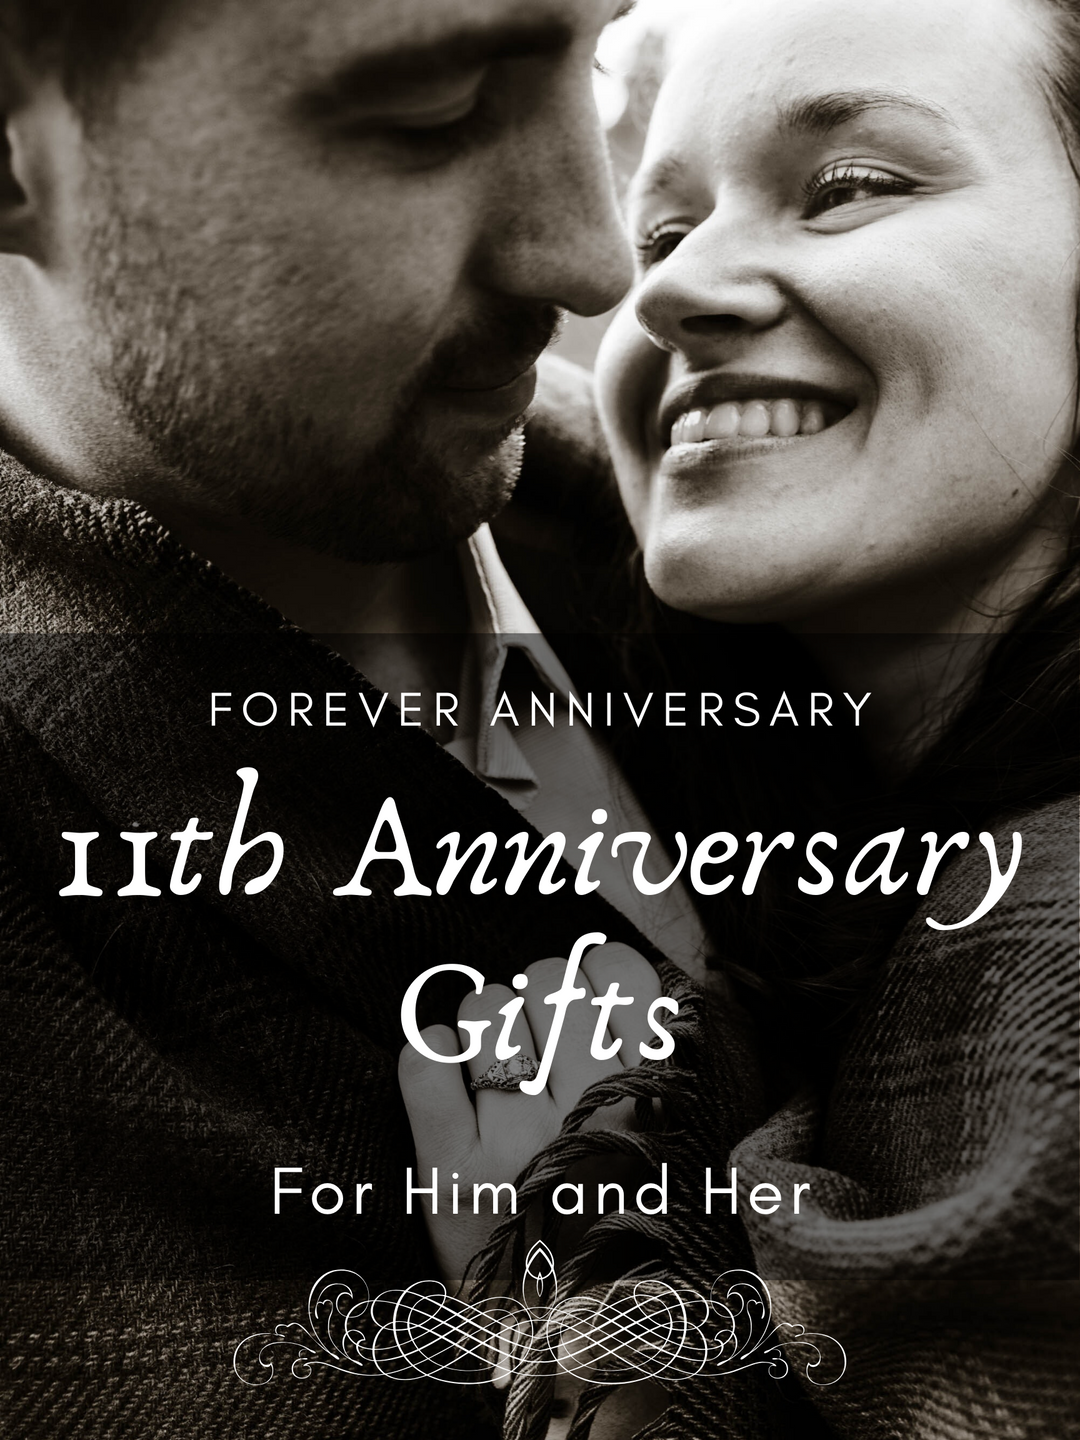 11th Anniversary Gifts for Him and Her